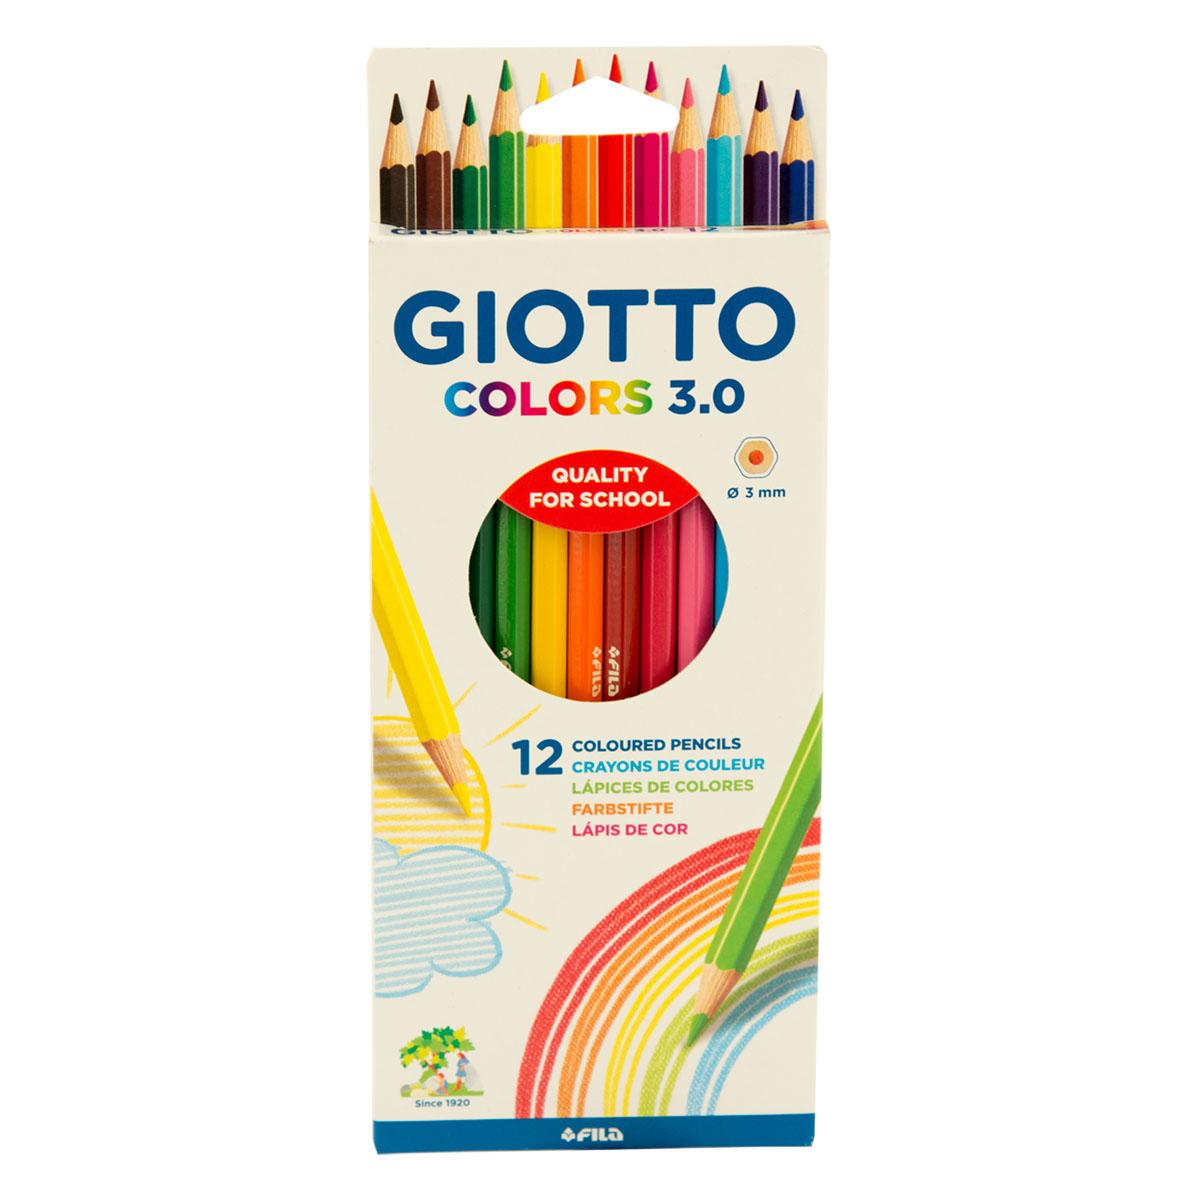 Selected image for GIOTTO Colors 3.0 Drvene boje 12/1 2766